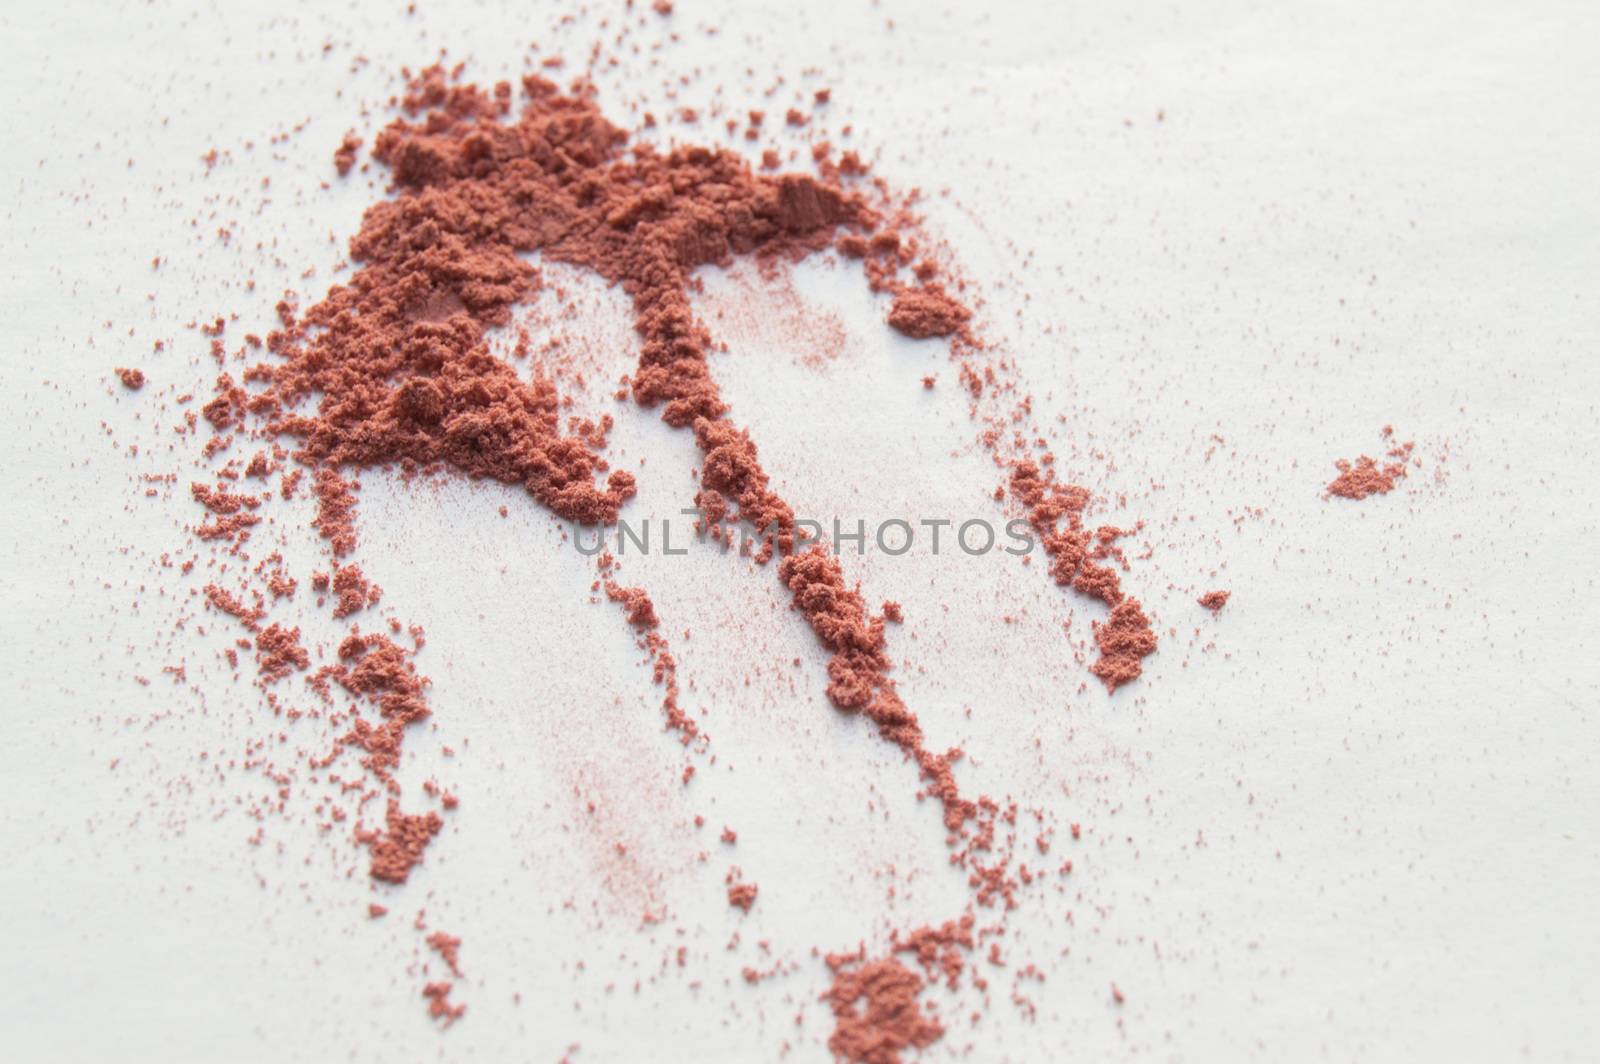 Scattered beige powder, Crumbles natural makeup powder on white background by claire_lucia